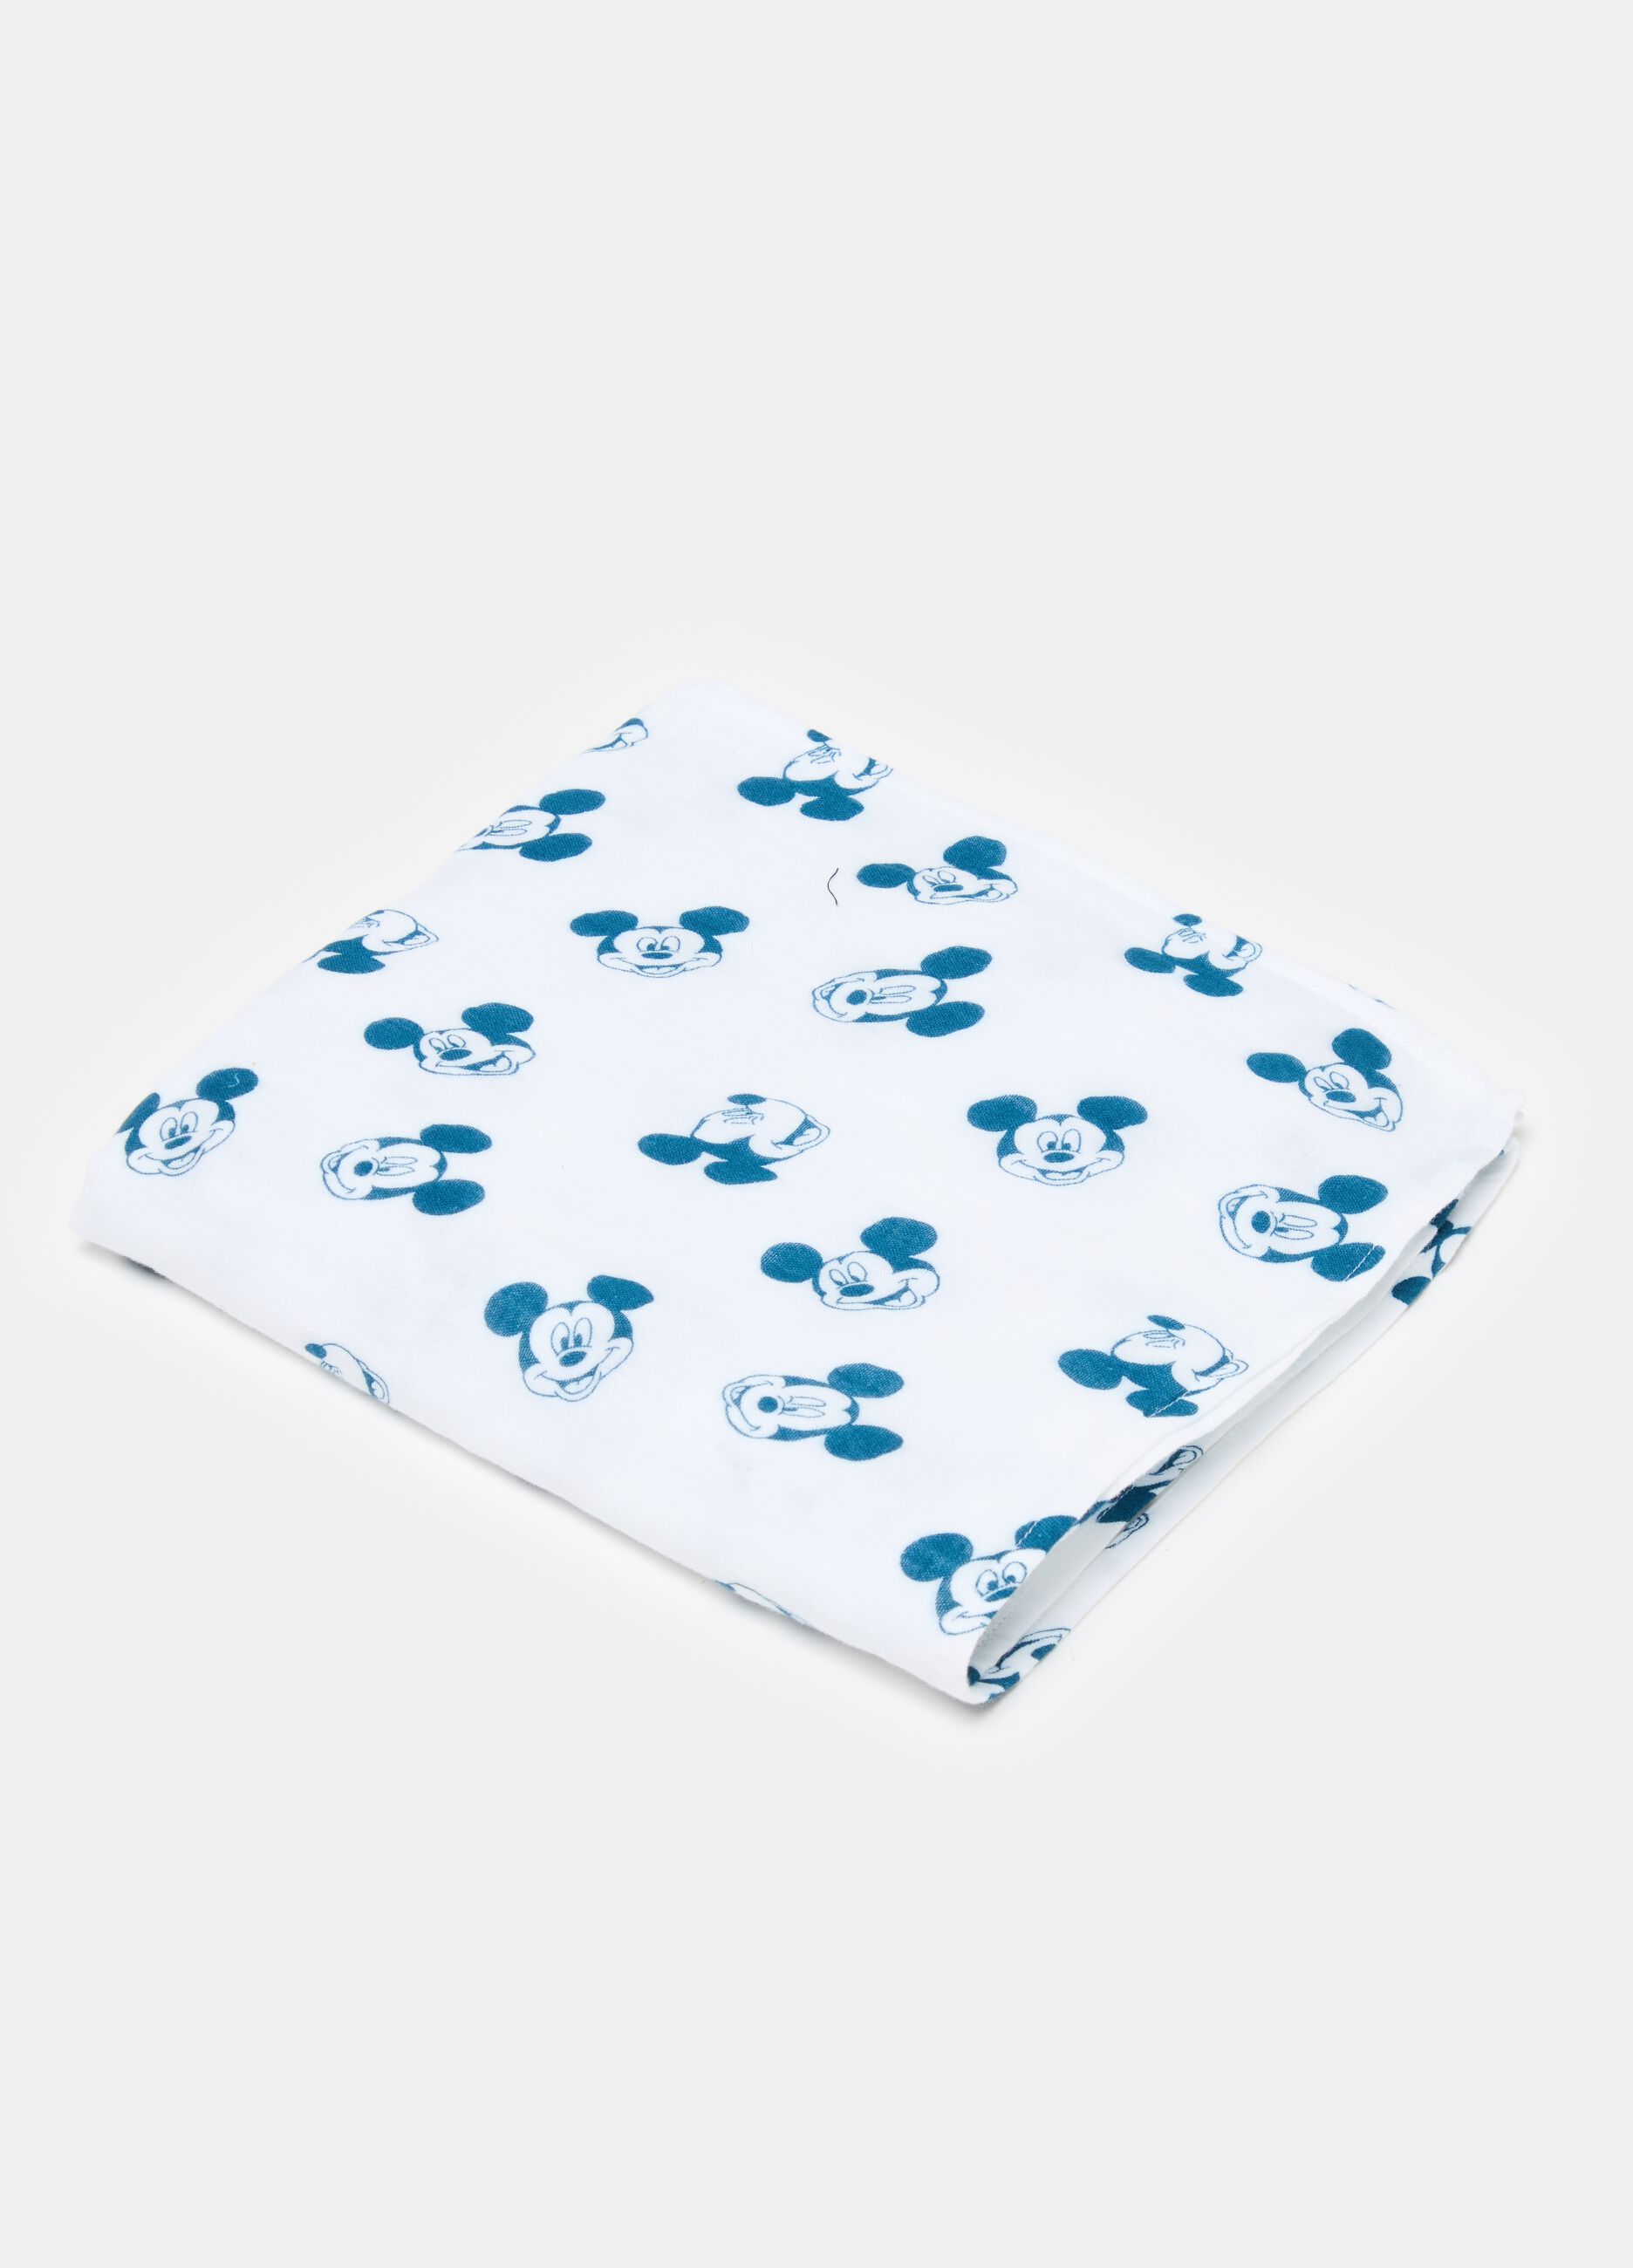 Muslin blanket with Mickey Mouse print